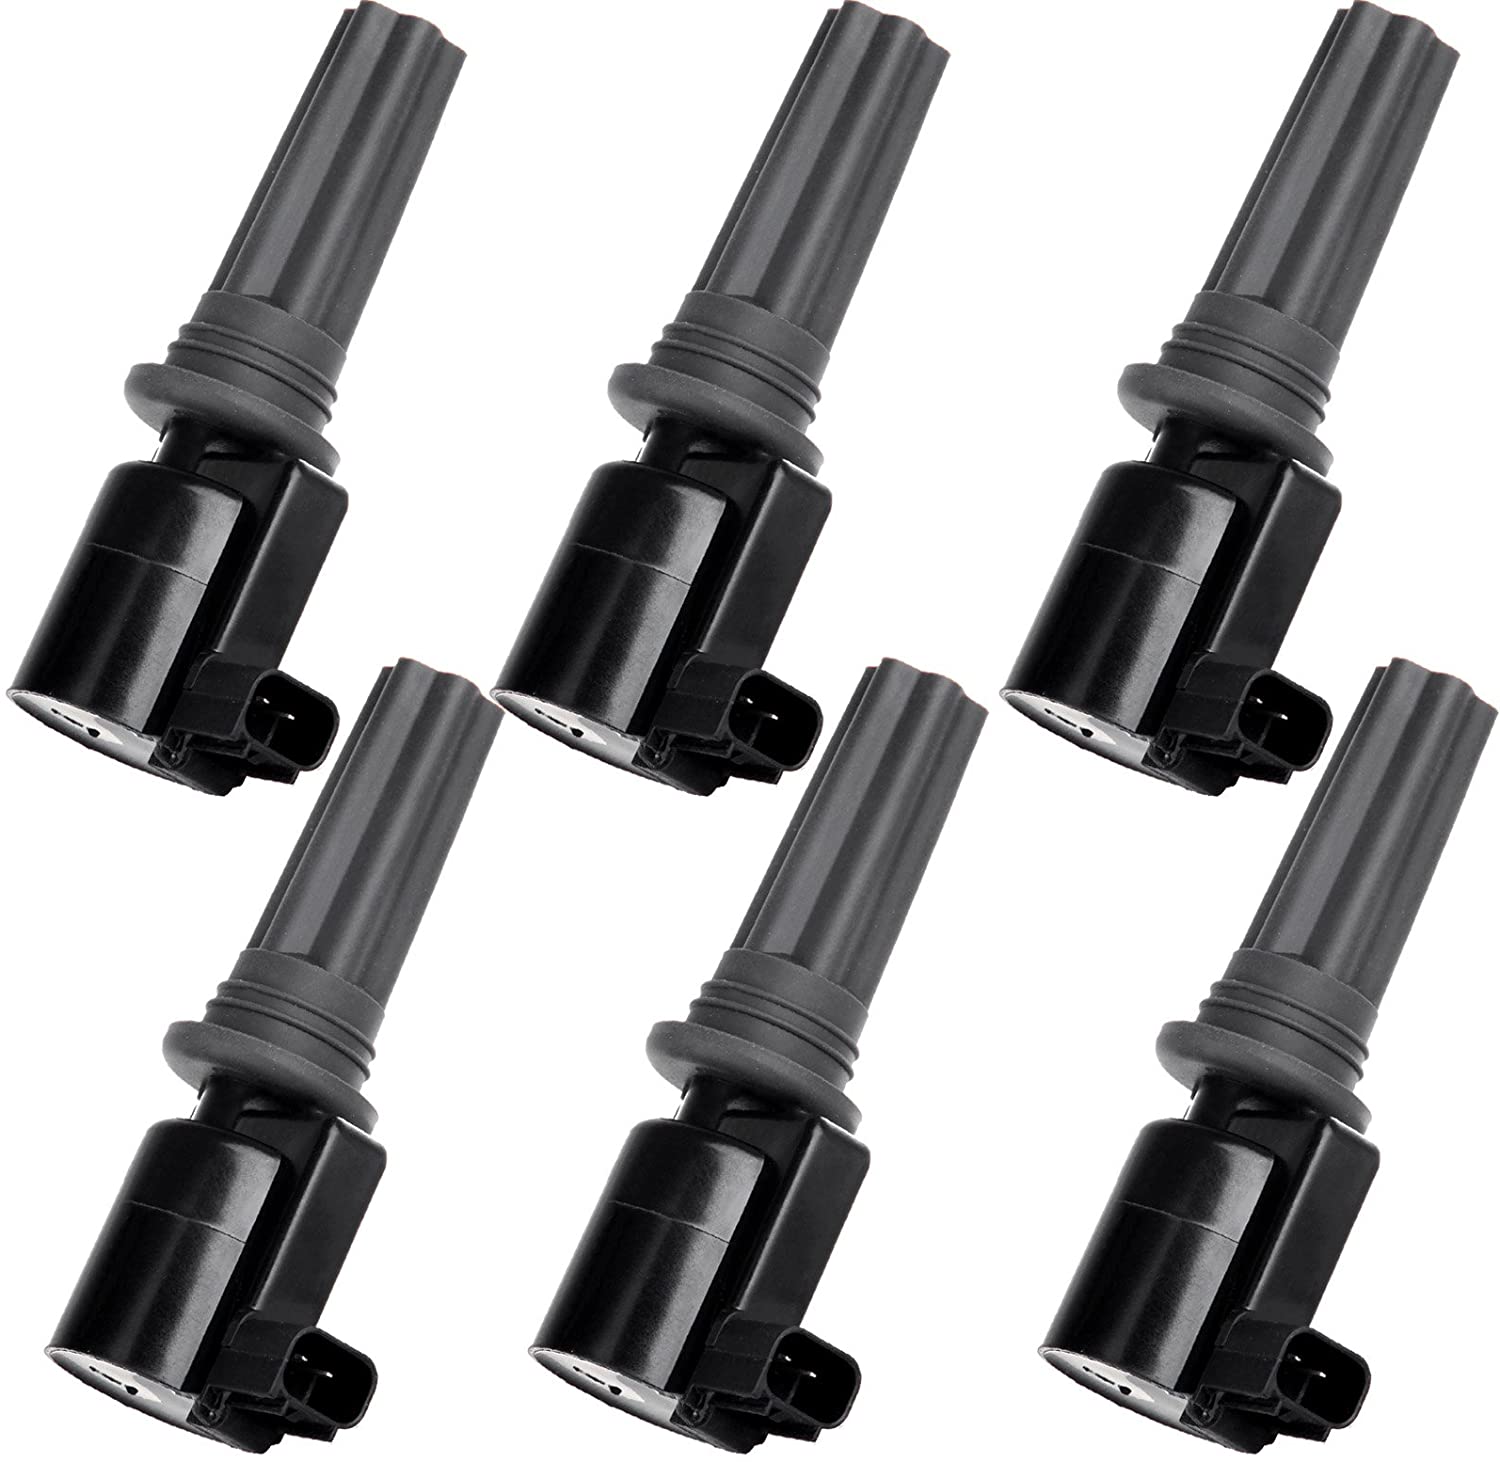 SCITOO Pack of 6 Ignition Coil Packs Compatible for Lin-coln LS 3.0L for Jaguar S-Type 3.0L2000-2005 Automobiles Fit for OE DG528